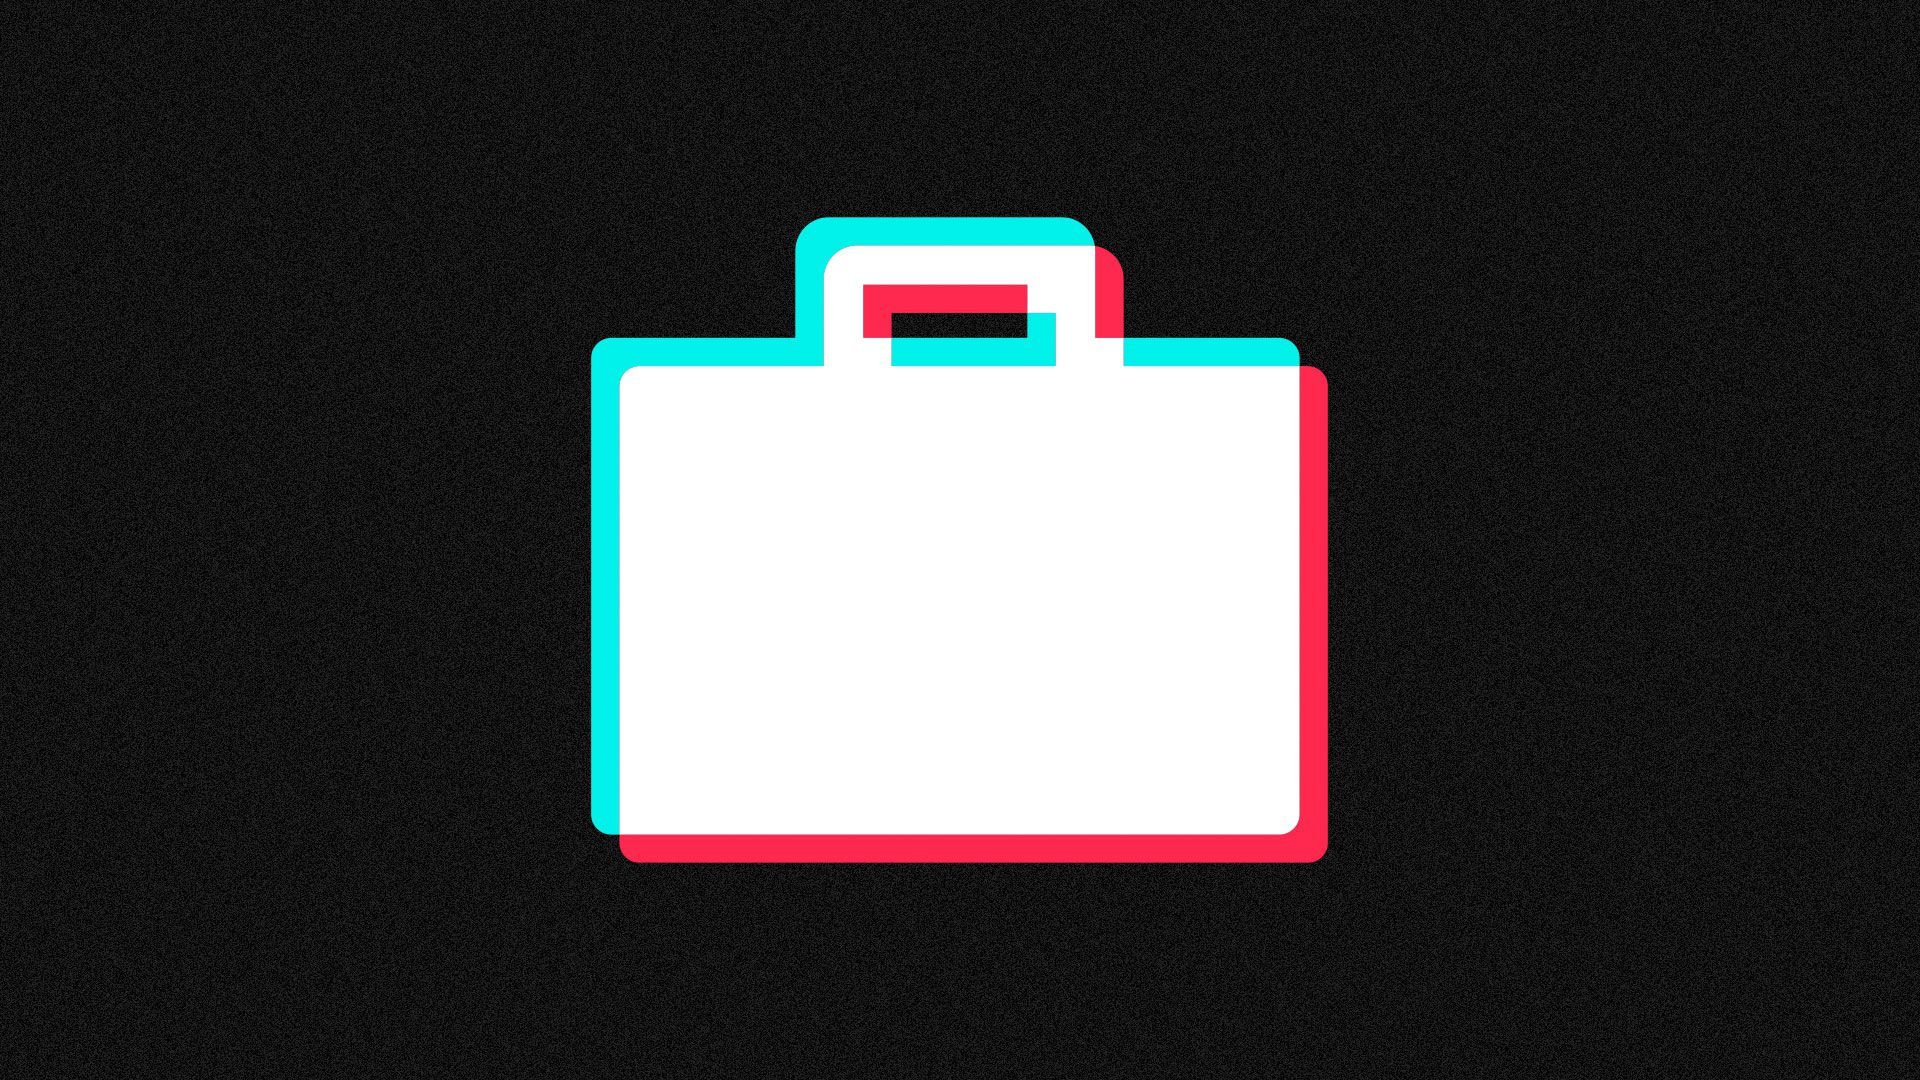 Illustration of a briefcase icon in the style of the TikTok logo.  